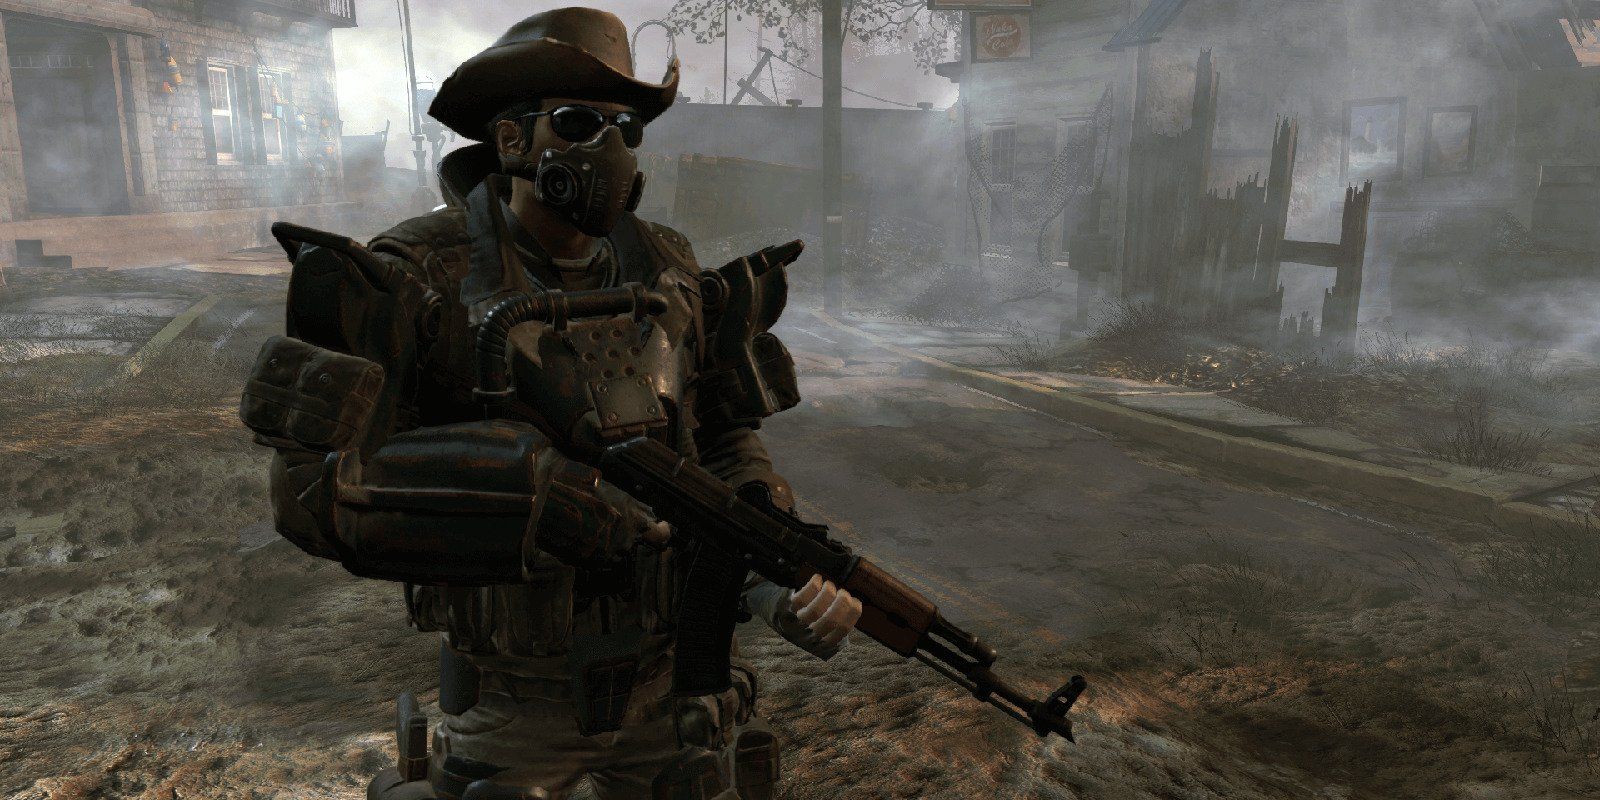 A Wasteland Ranger looks around in Fallout 4